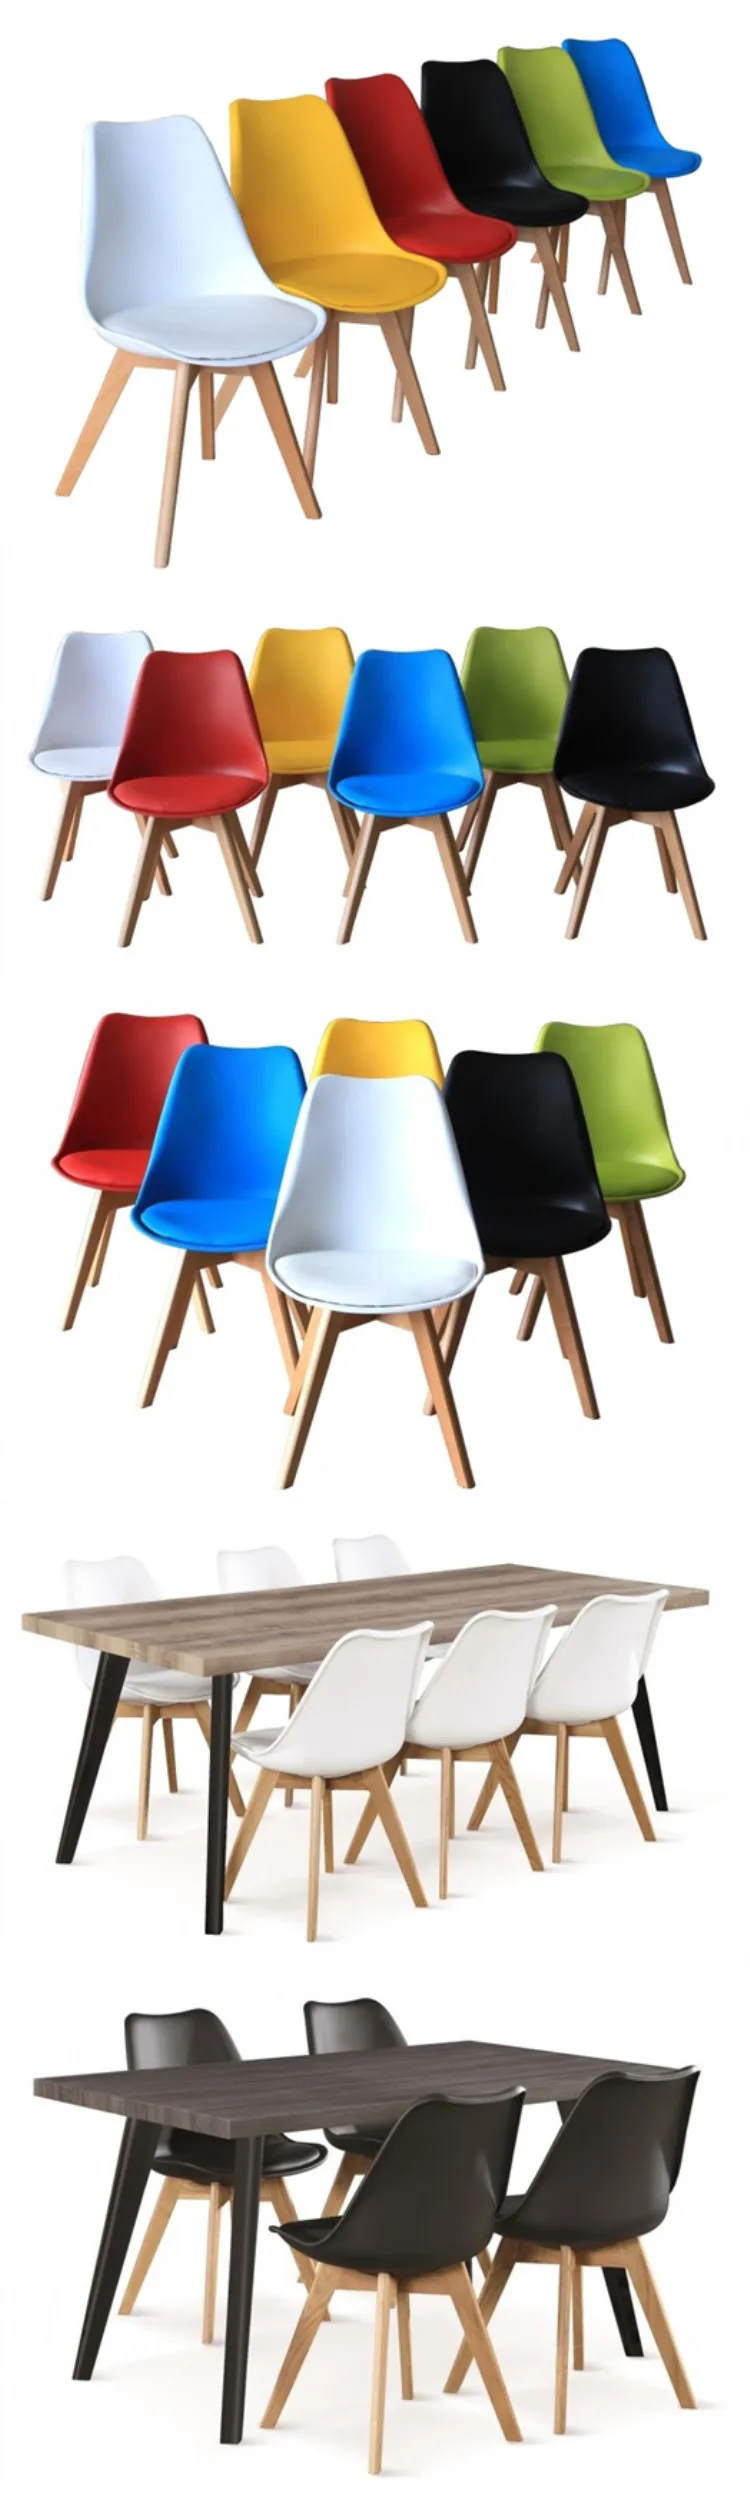 Wholesale cheap Nordic plastic light colored high quality dining chairs with beech legs